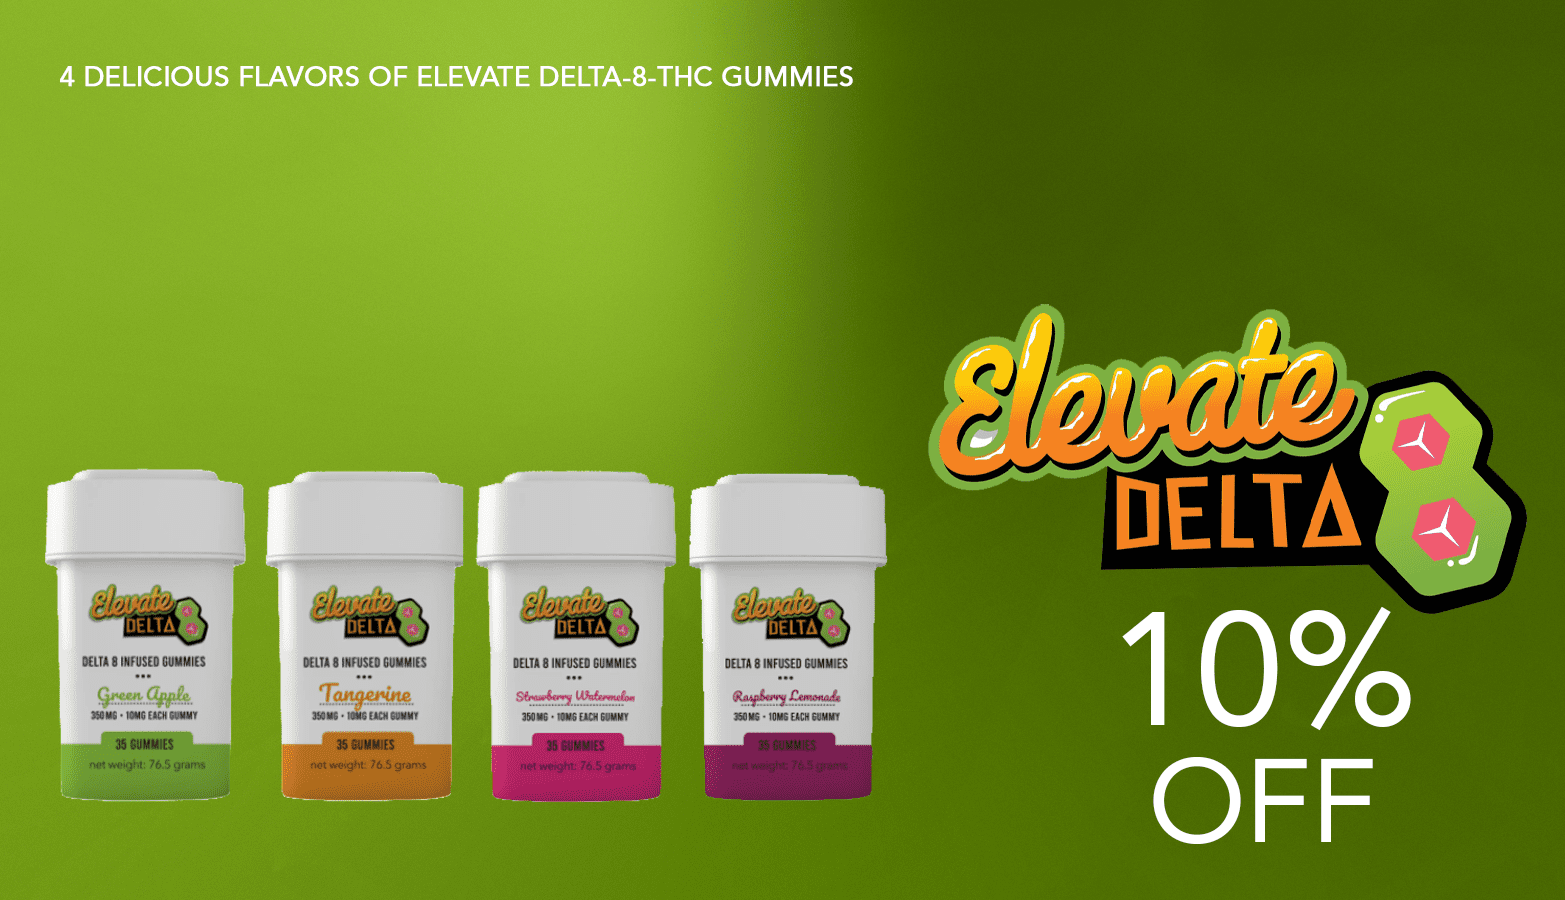 Elevate Delta 8 Coupons - Save On Cannabis